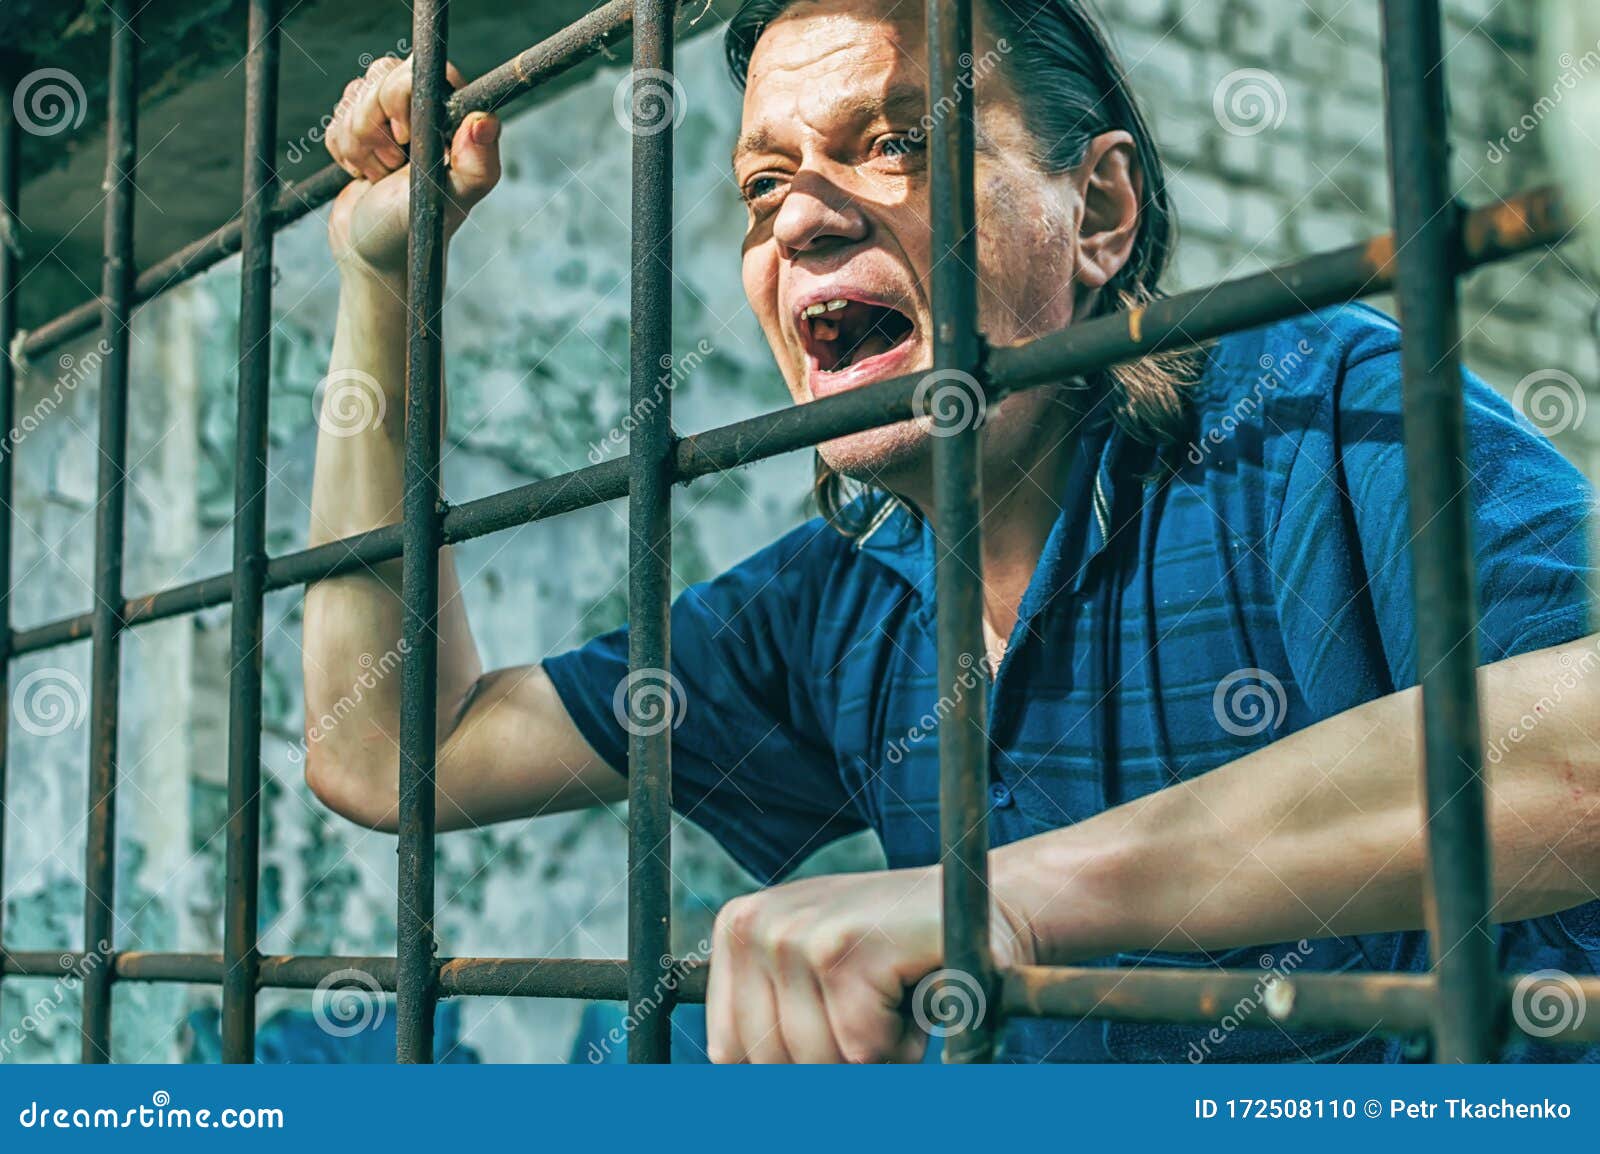 A Depressed Man In Handcuffs Behind Bars A Depressed Arrested Male Offender Is Jailed Shouts 